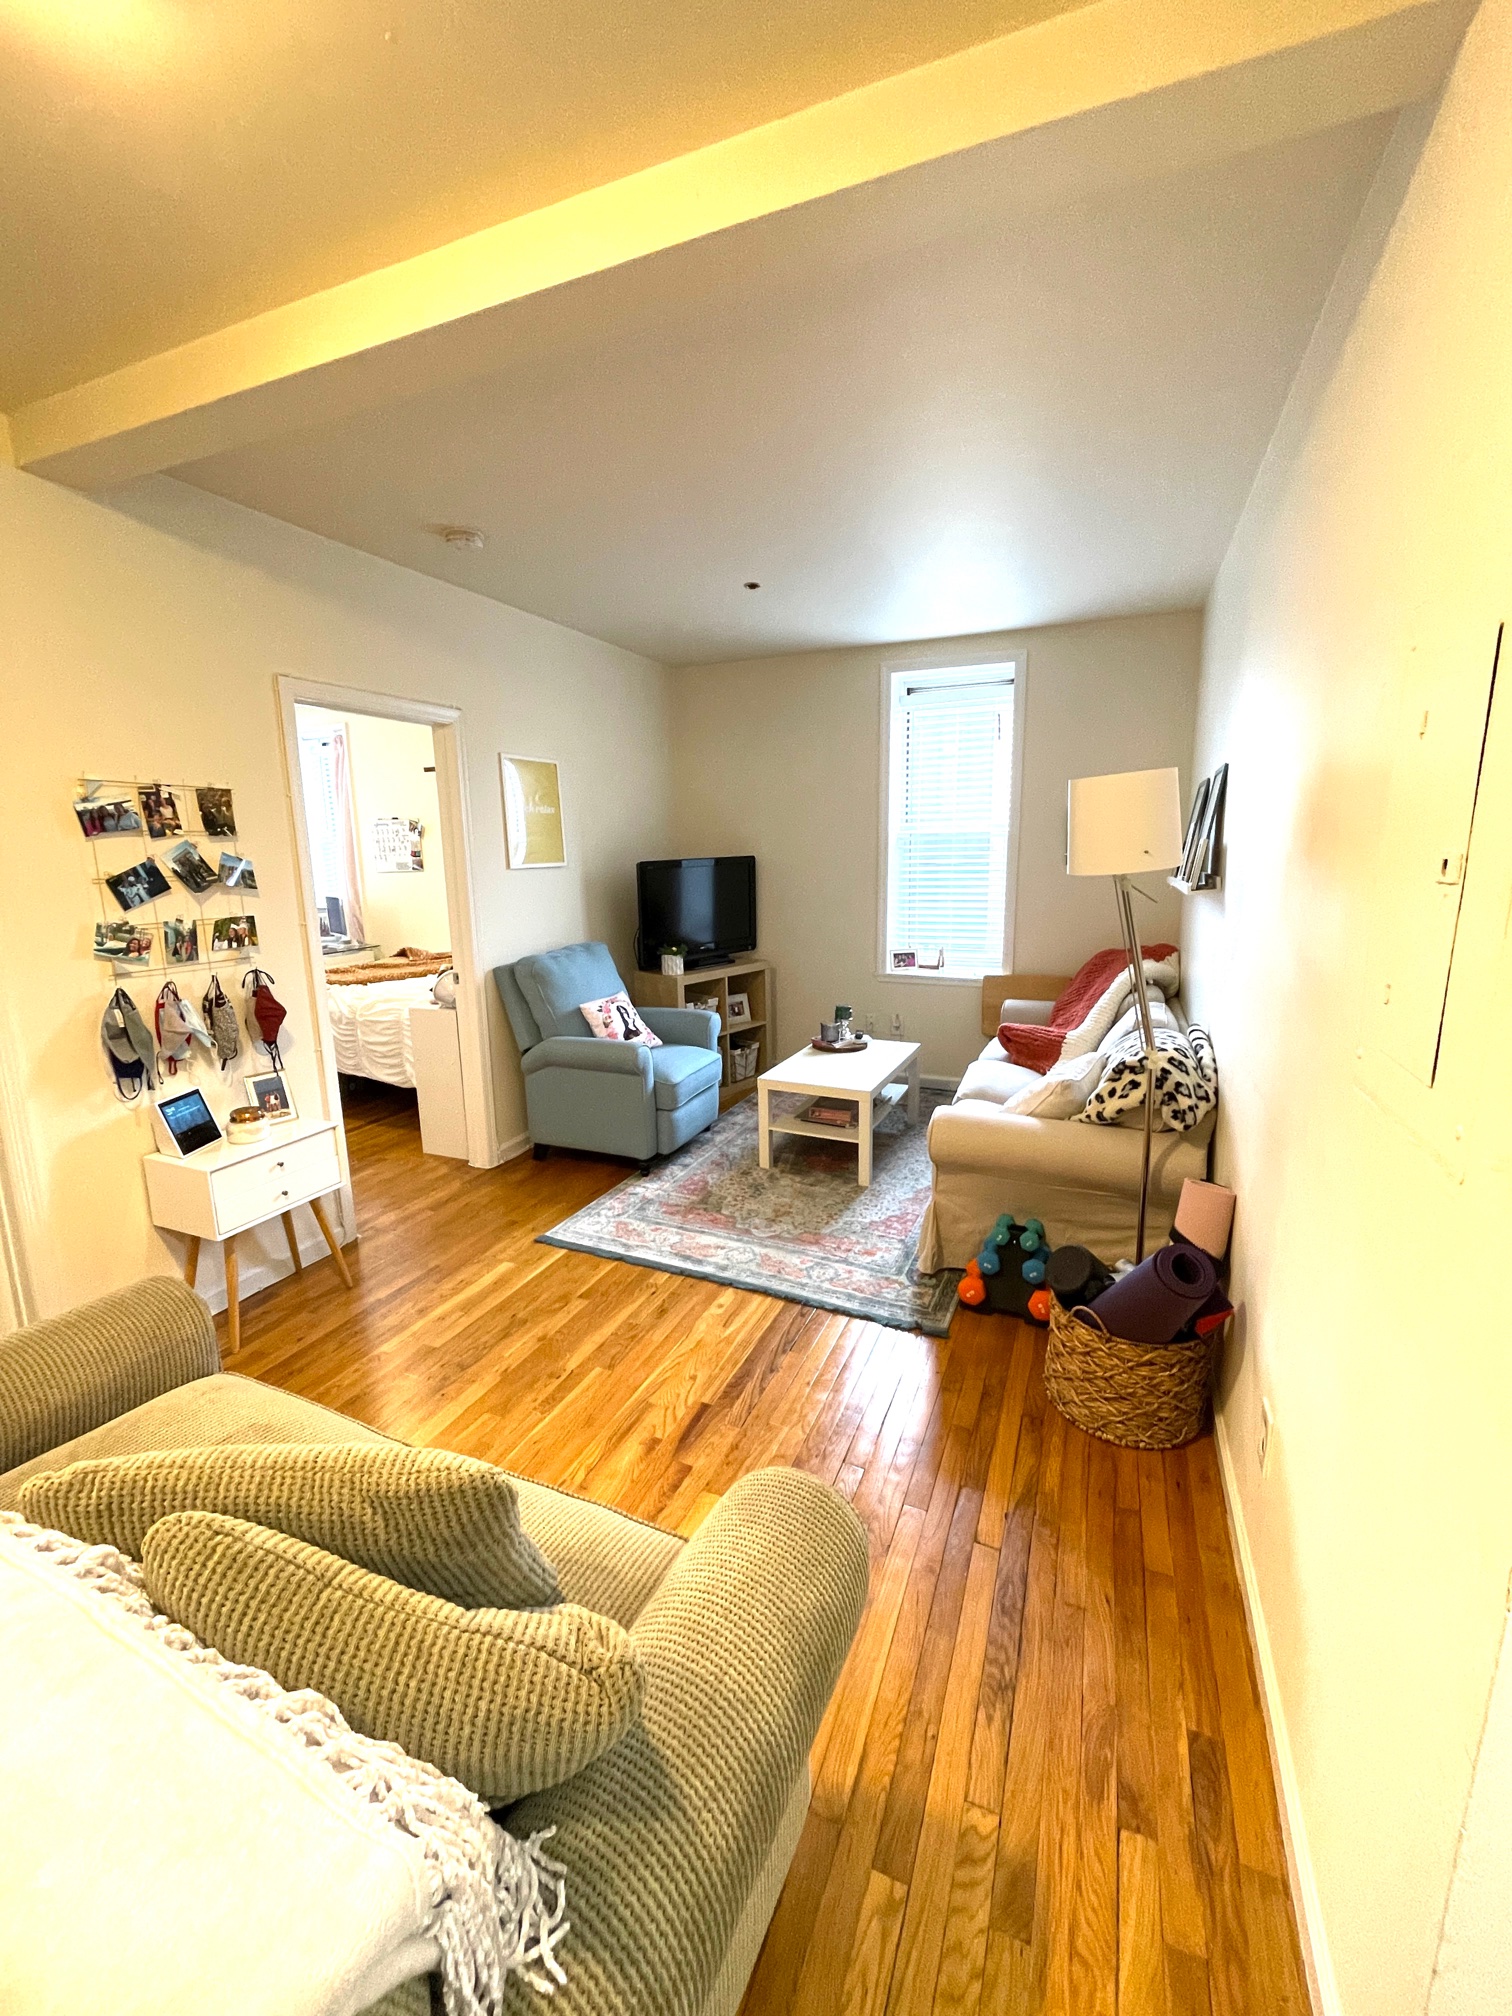 ***NO BROKER FEE*** This is the perfect 2 bedroom value in Hoboken!! Apartment features include: dishwasher, nice hardwood floors, recently updated appliances and bathroom, 2 nice size bedrooms that are equal size, nice size living room and kitchen and just an all around great layout. Building includes a laundry room! No Pets.